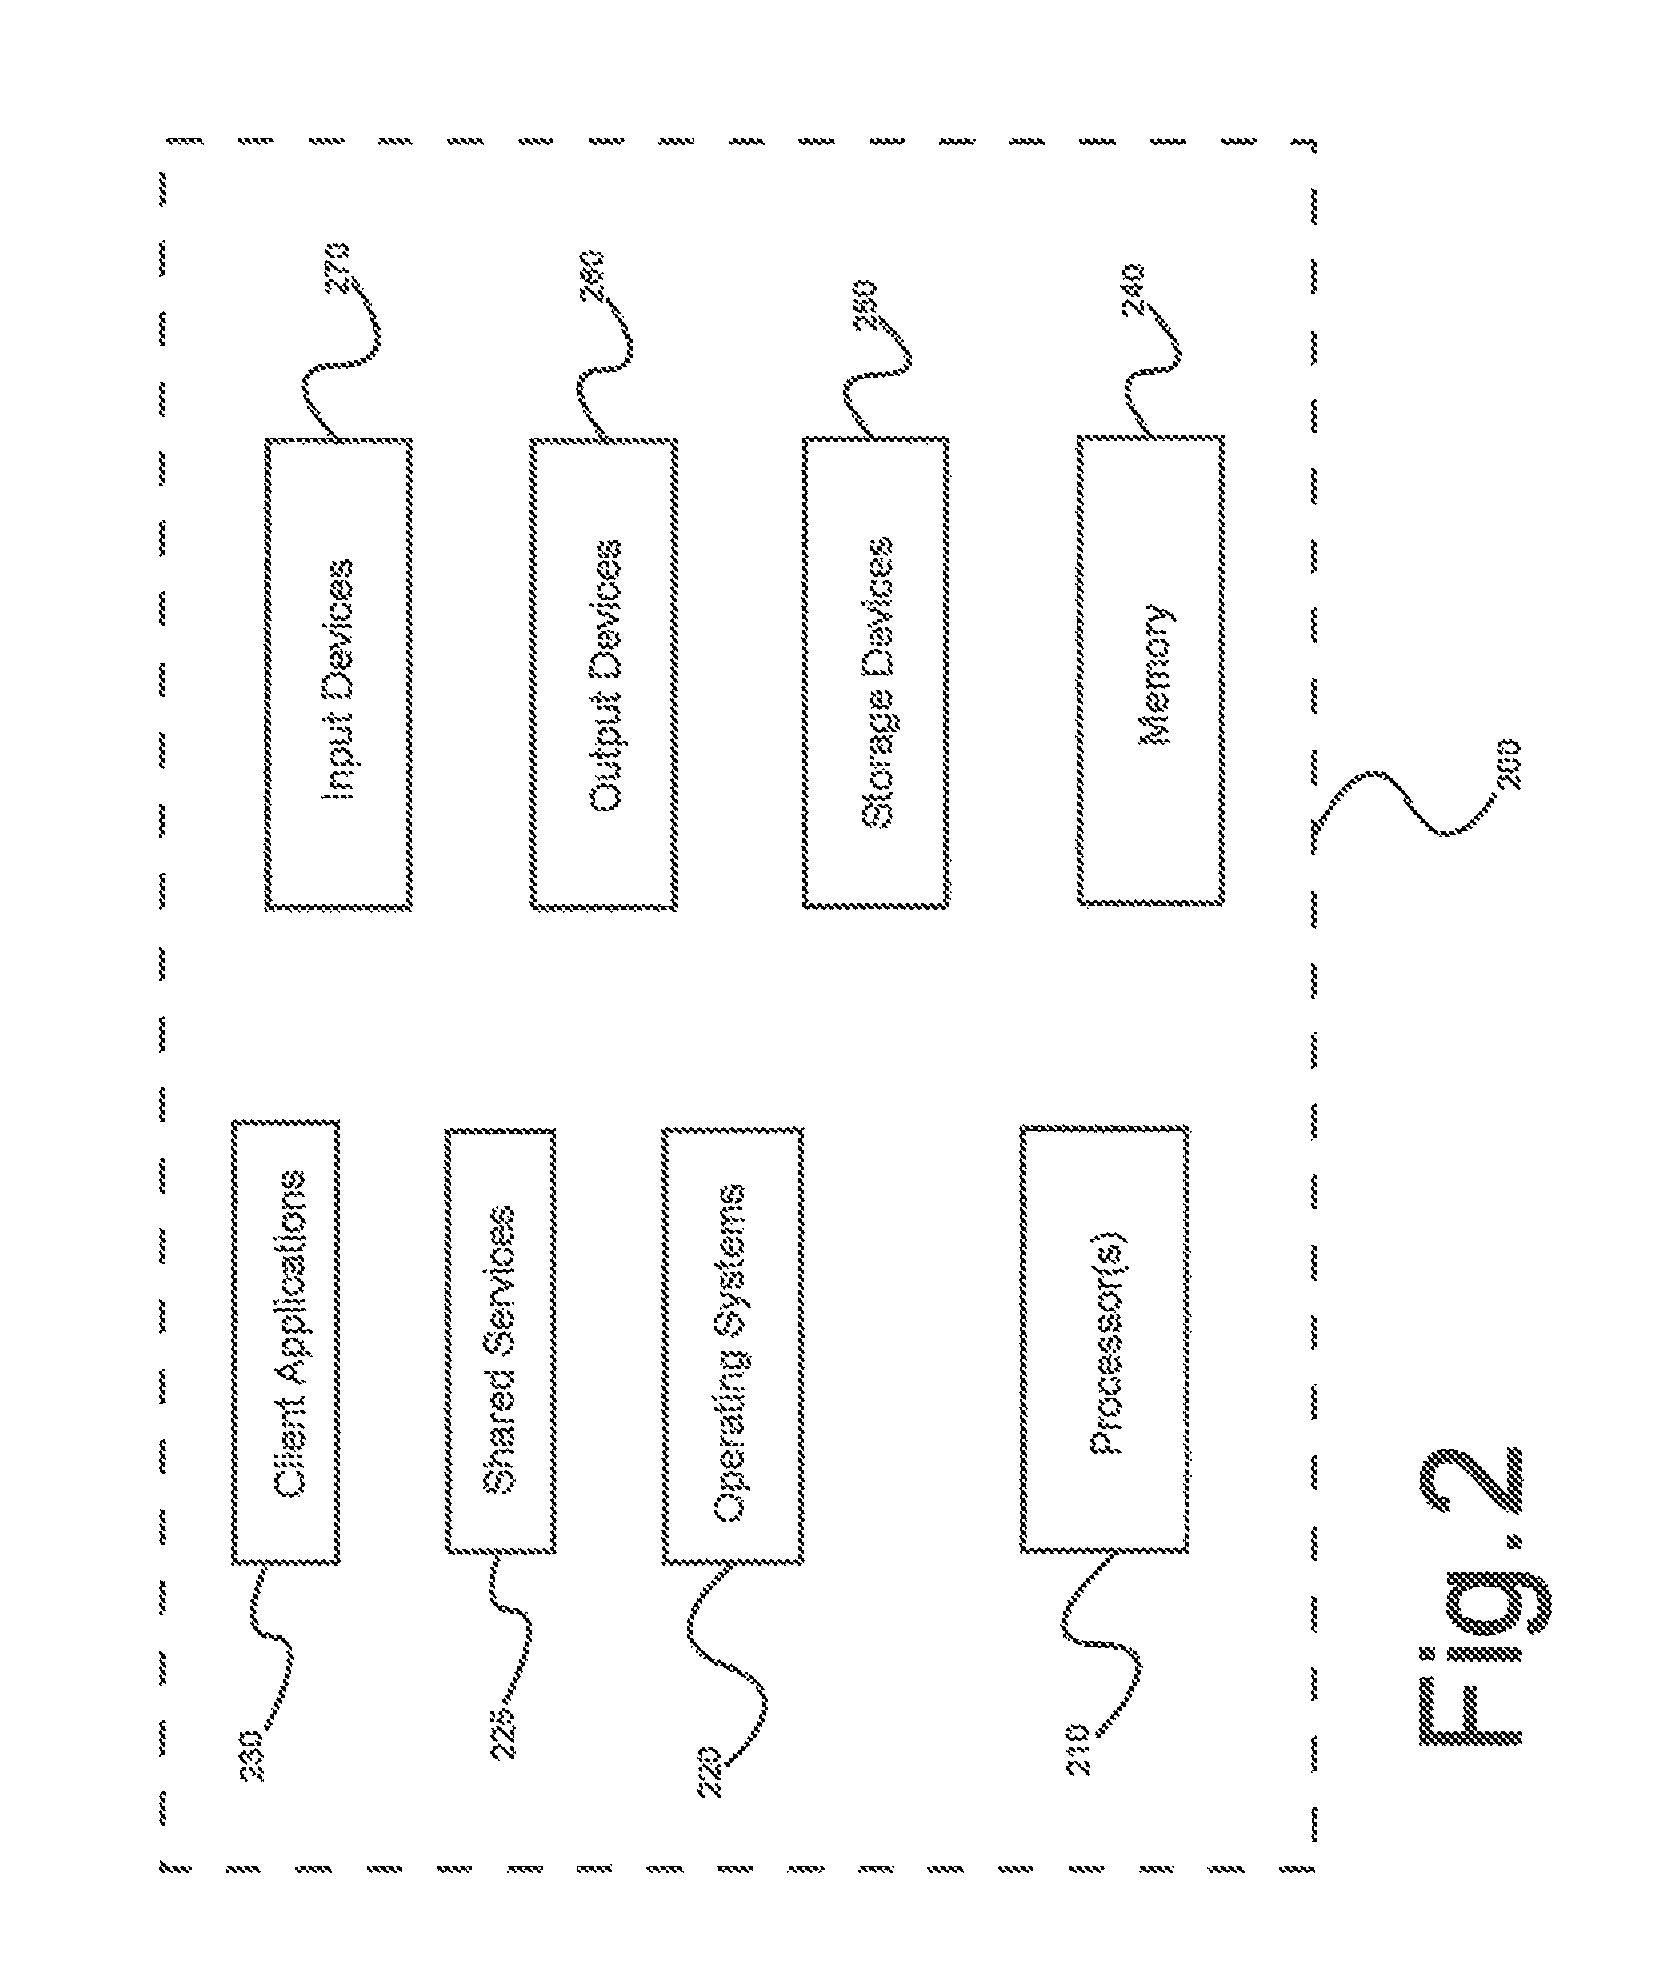 System and methods for automated testing of functionally complex systems